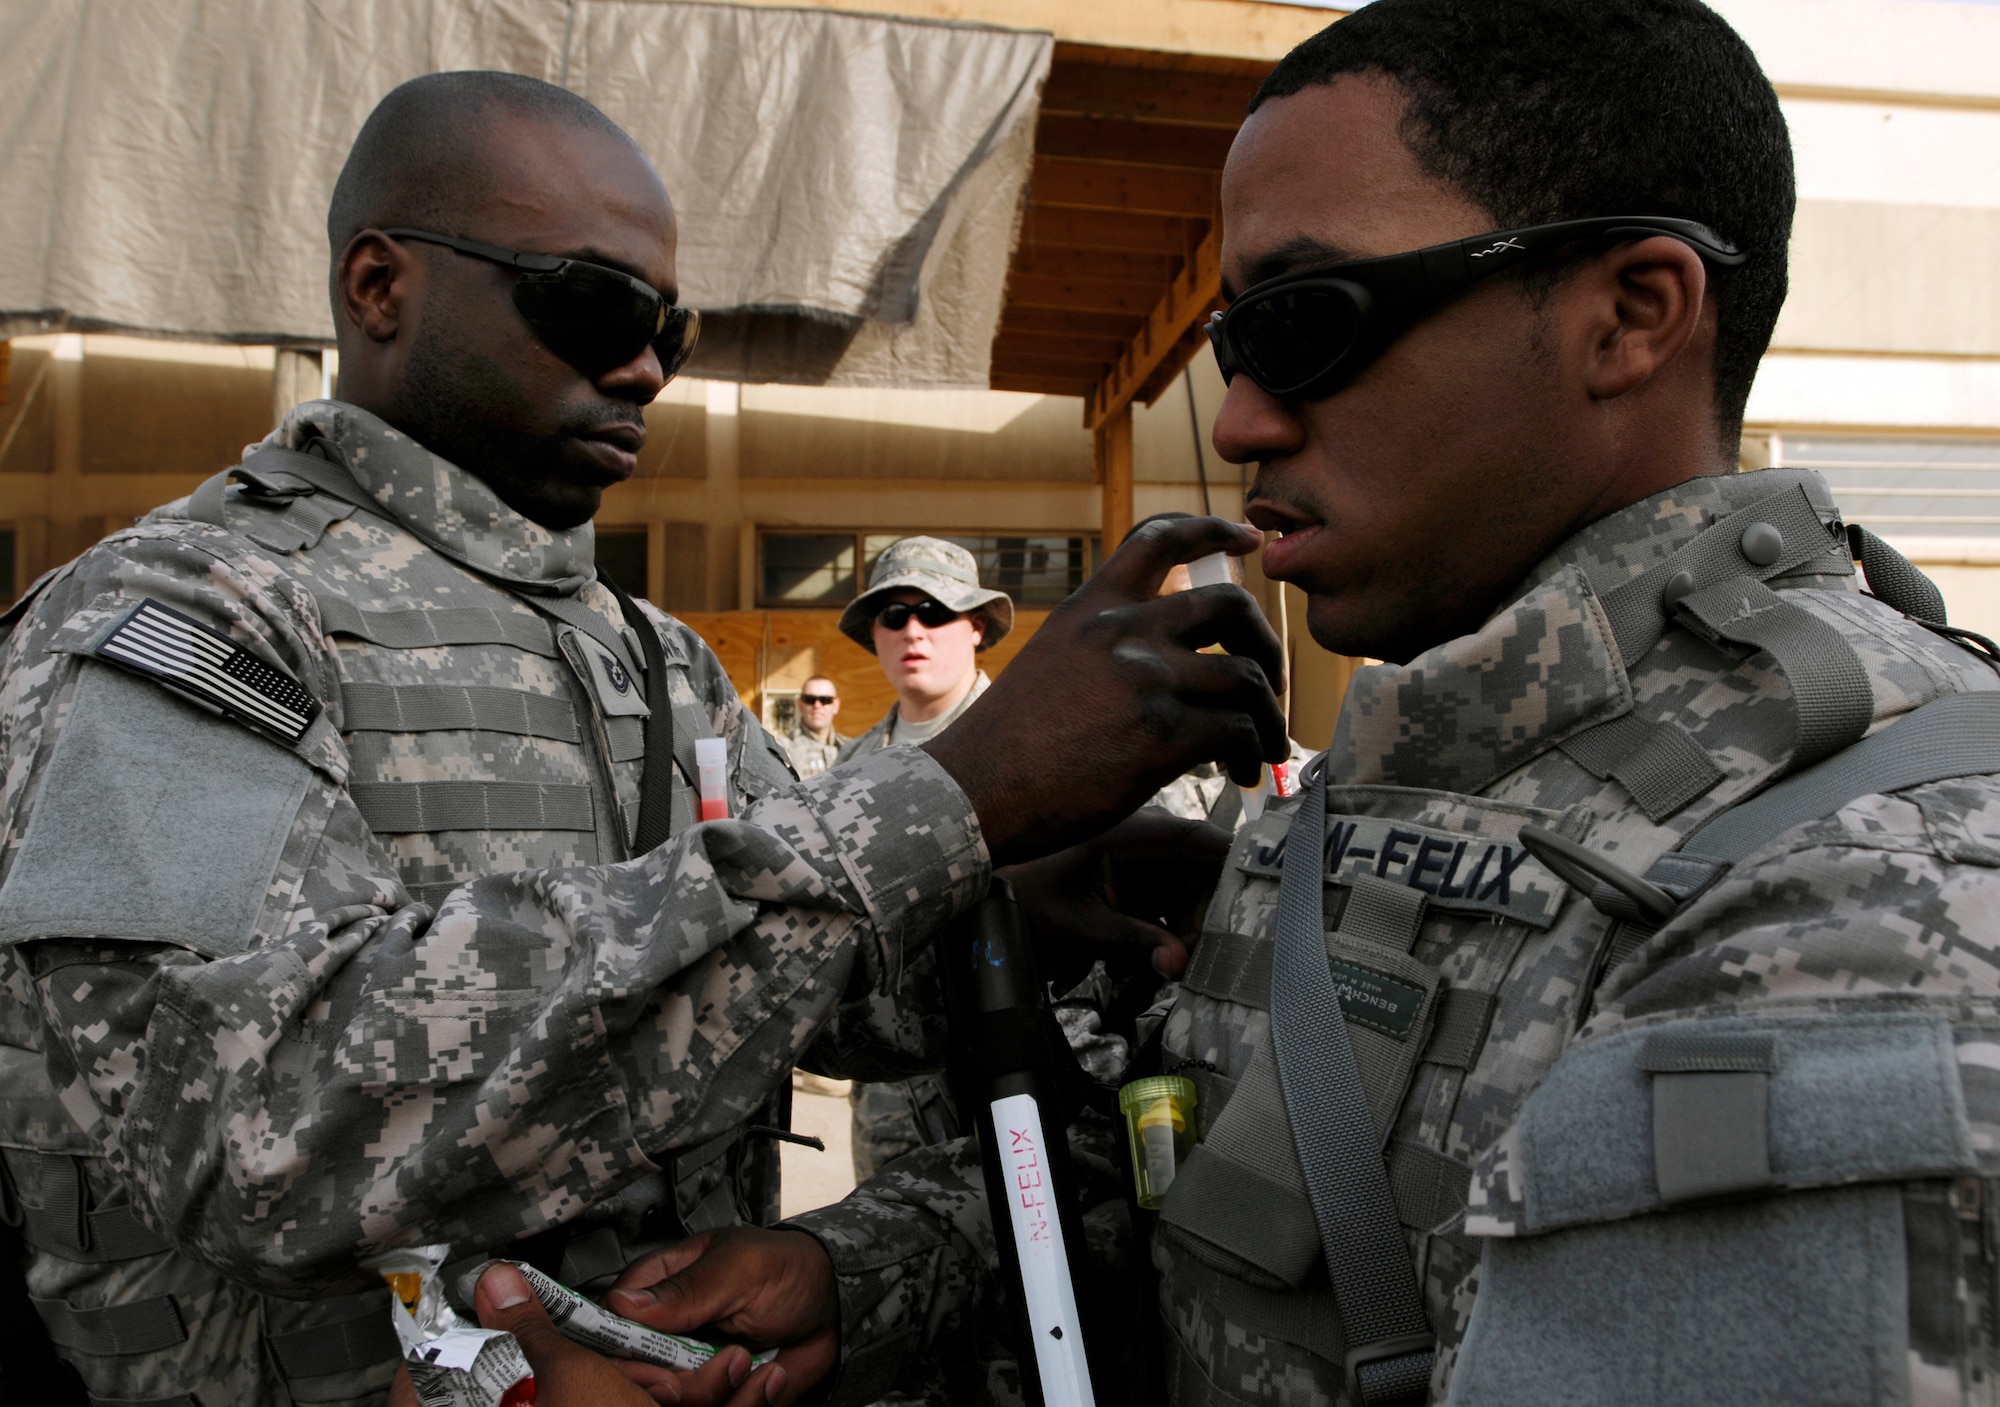 JOINT BASE BALAD, Iraq -- Tech. Sgt. Christopher Downing (left) inserts glow sticks into Staff Sgt. Jean Jean-Felix's body armor here before a convoy operation Sept. 4. Downing, a structural craftsman, and Jean-Felix, an electrical journeyman, are assigned to the 732nd Expeditionary Civil Engineer Squadron Utilities Detachment 6, which will build new facilities at a forward operating base to house approximately 350 Soldiers. Downing is deployed from Elmendrof Air Force Base, Alaska, and his hometown is Charleston, S.C. Jean-Felix is deployed from Yokota Air Base, Japan, and is originally from Orlando, Fla. (U.S. Air Force photo/Airman 1st Class Jason Epley)